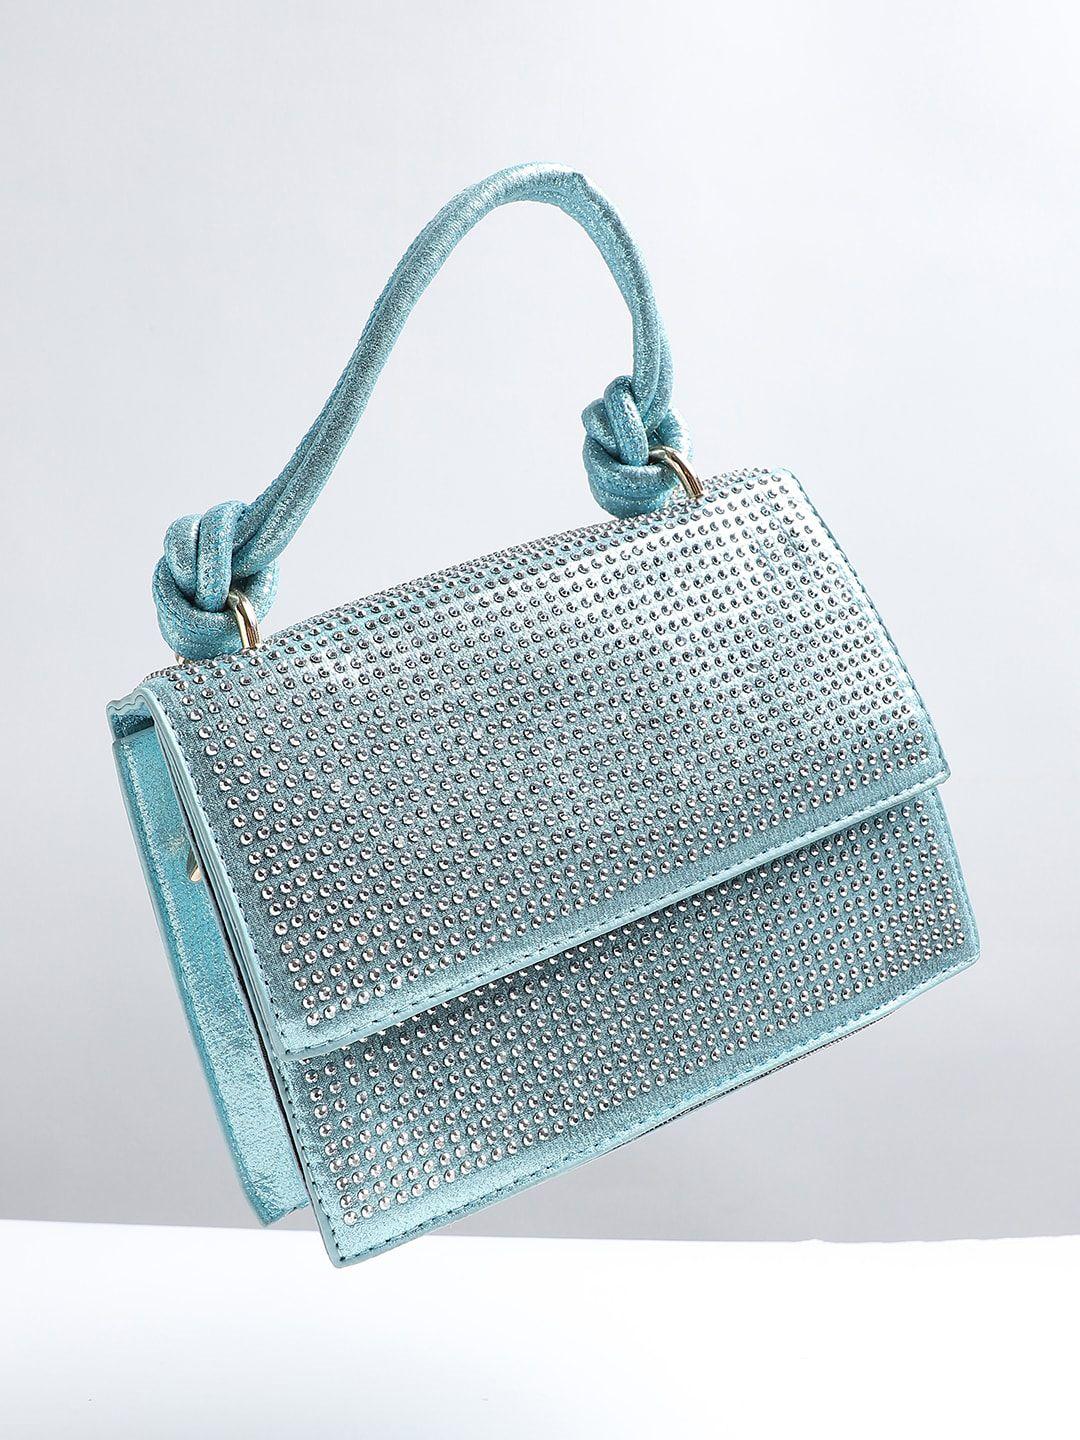 haute sauce by campus sutra blue textured structured handheld bag